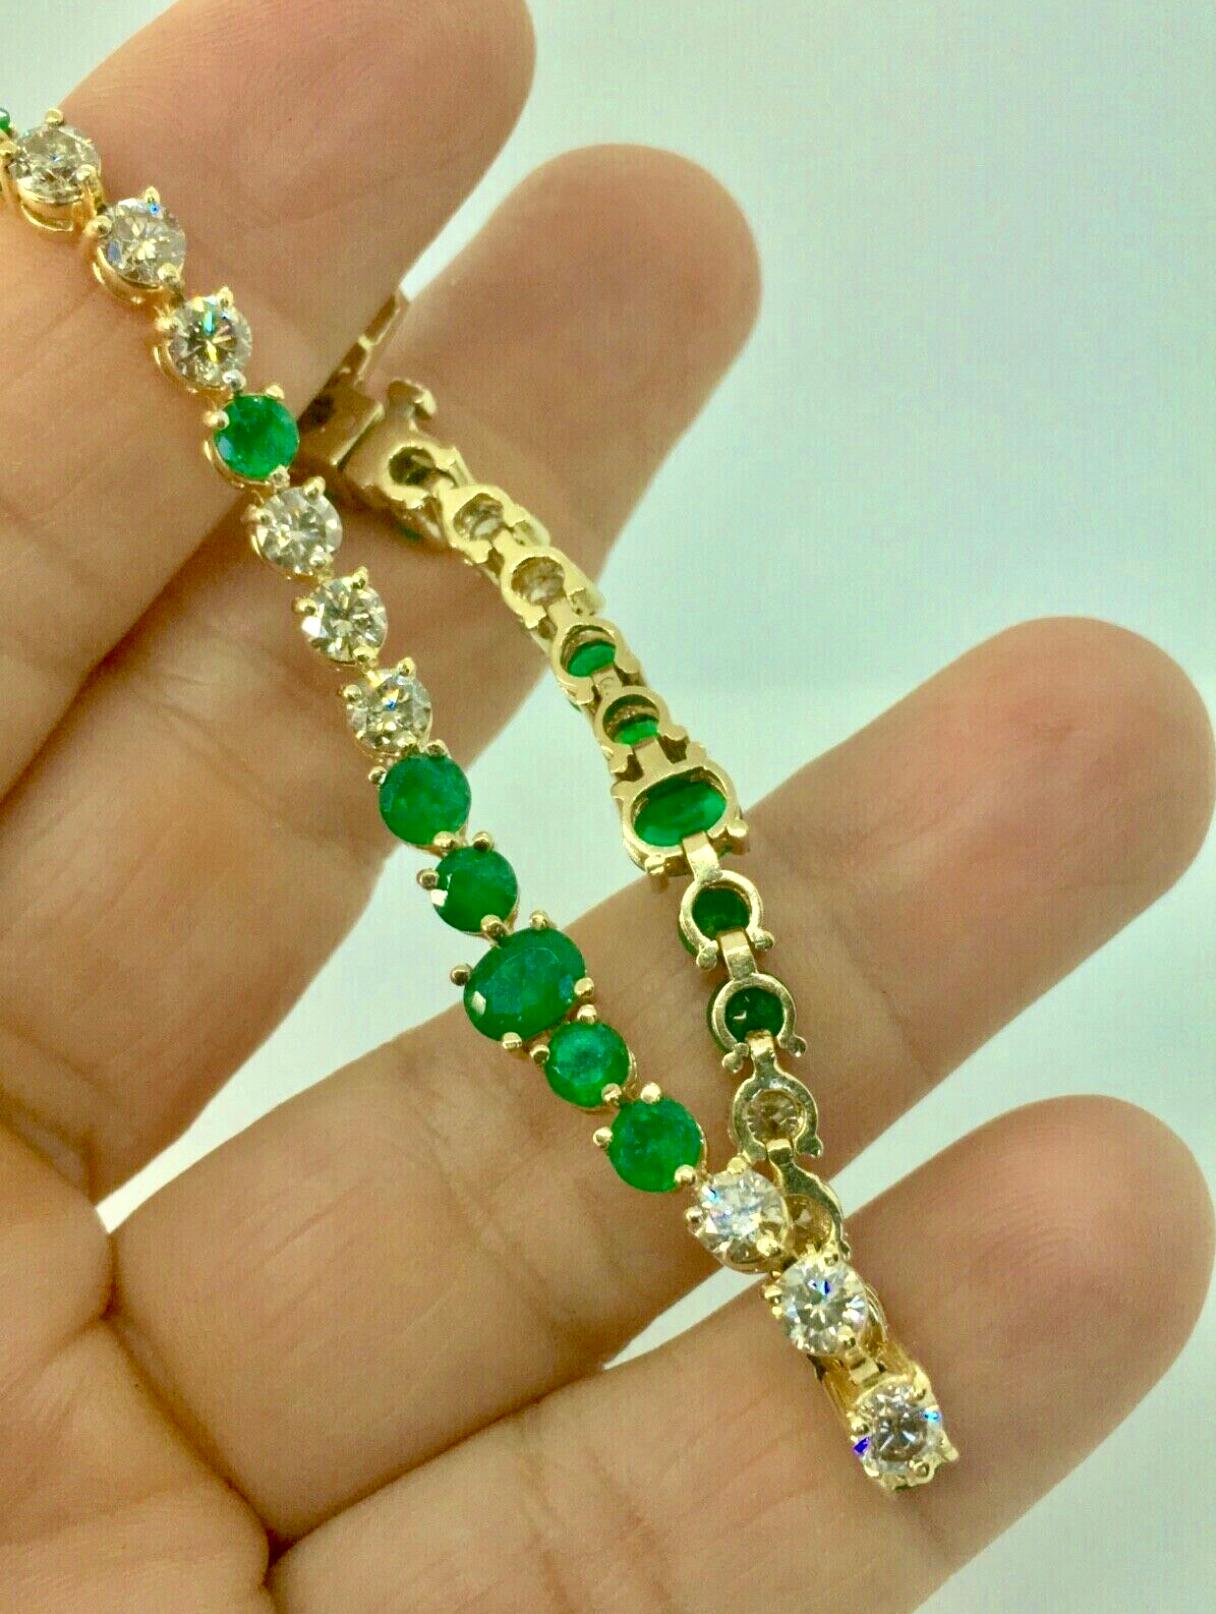 Supple sparkler riviera bracelet is composed of 7.00 carat of gemmy bright green round and oval faceted Colombian emeralds sections, sparkling with 5 carats of fine light champagne full-cut diamonds. Measuring a full 7 inches in length.  crafted in